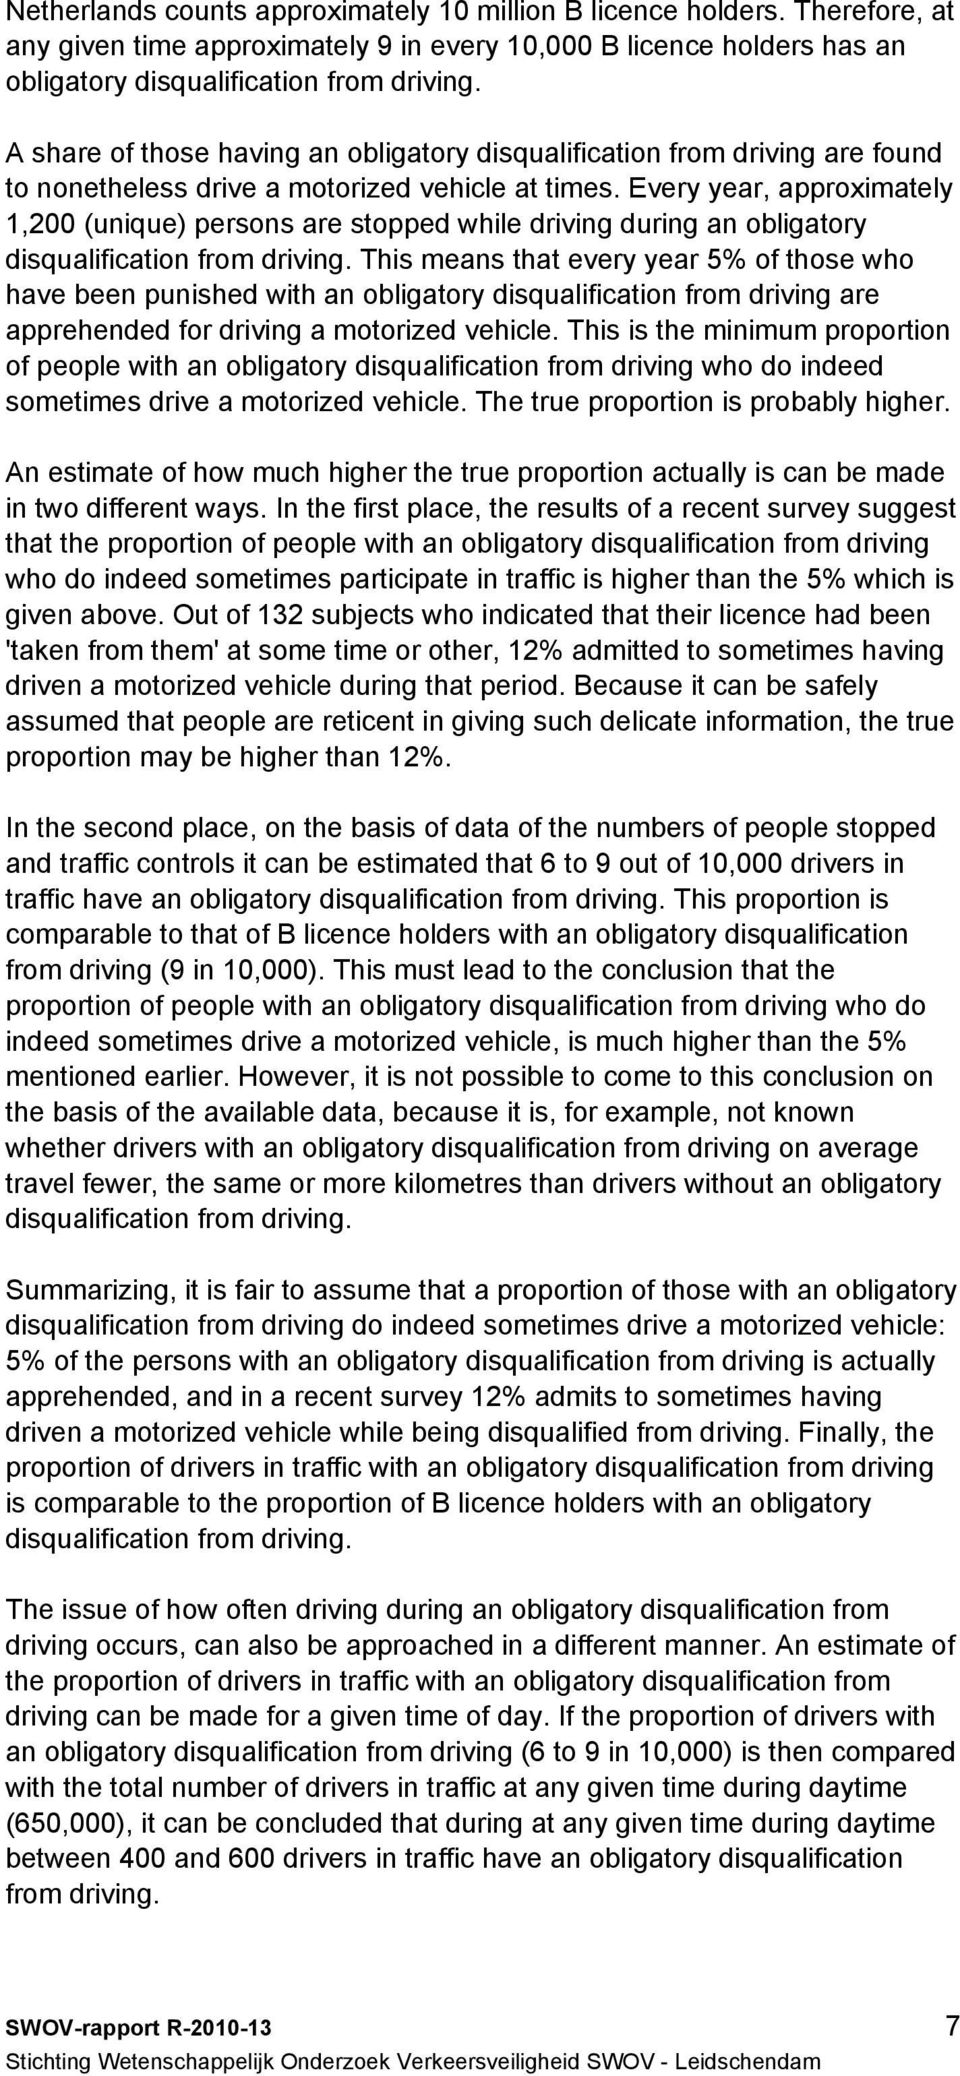 Every year, approximately 1,200 (unique) persons are stopped while driving during an obligatory disqualification from driving.